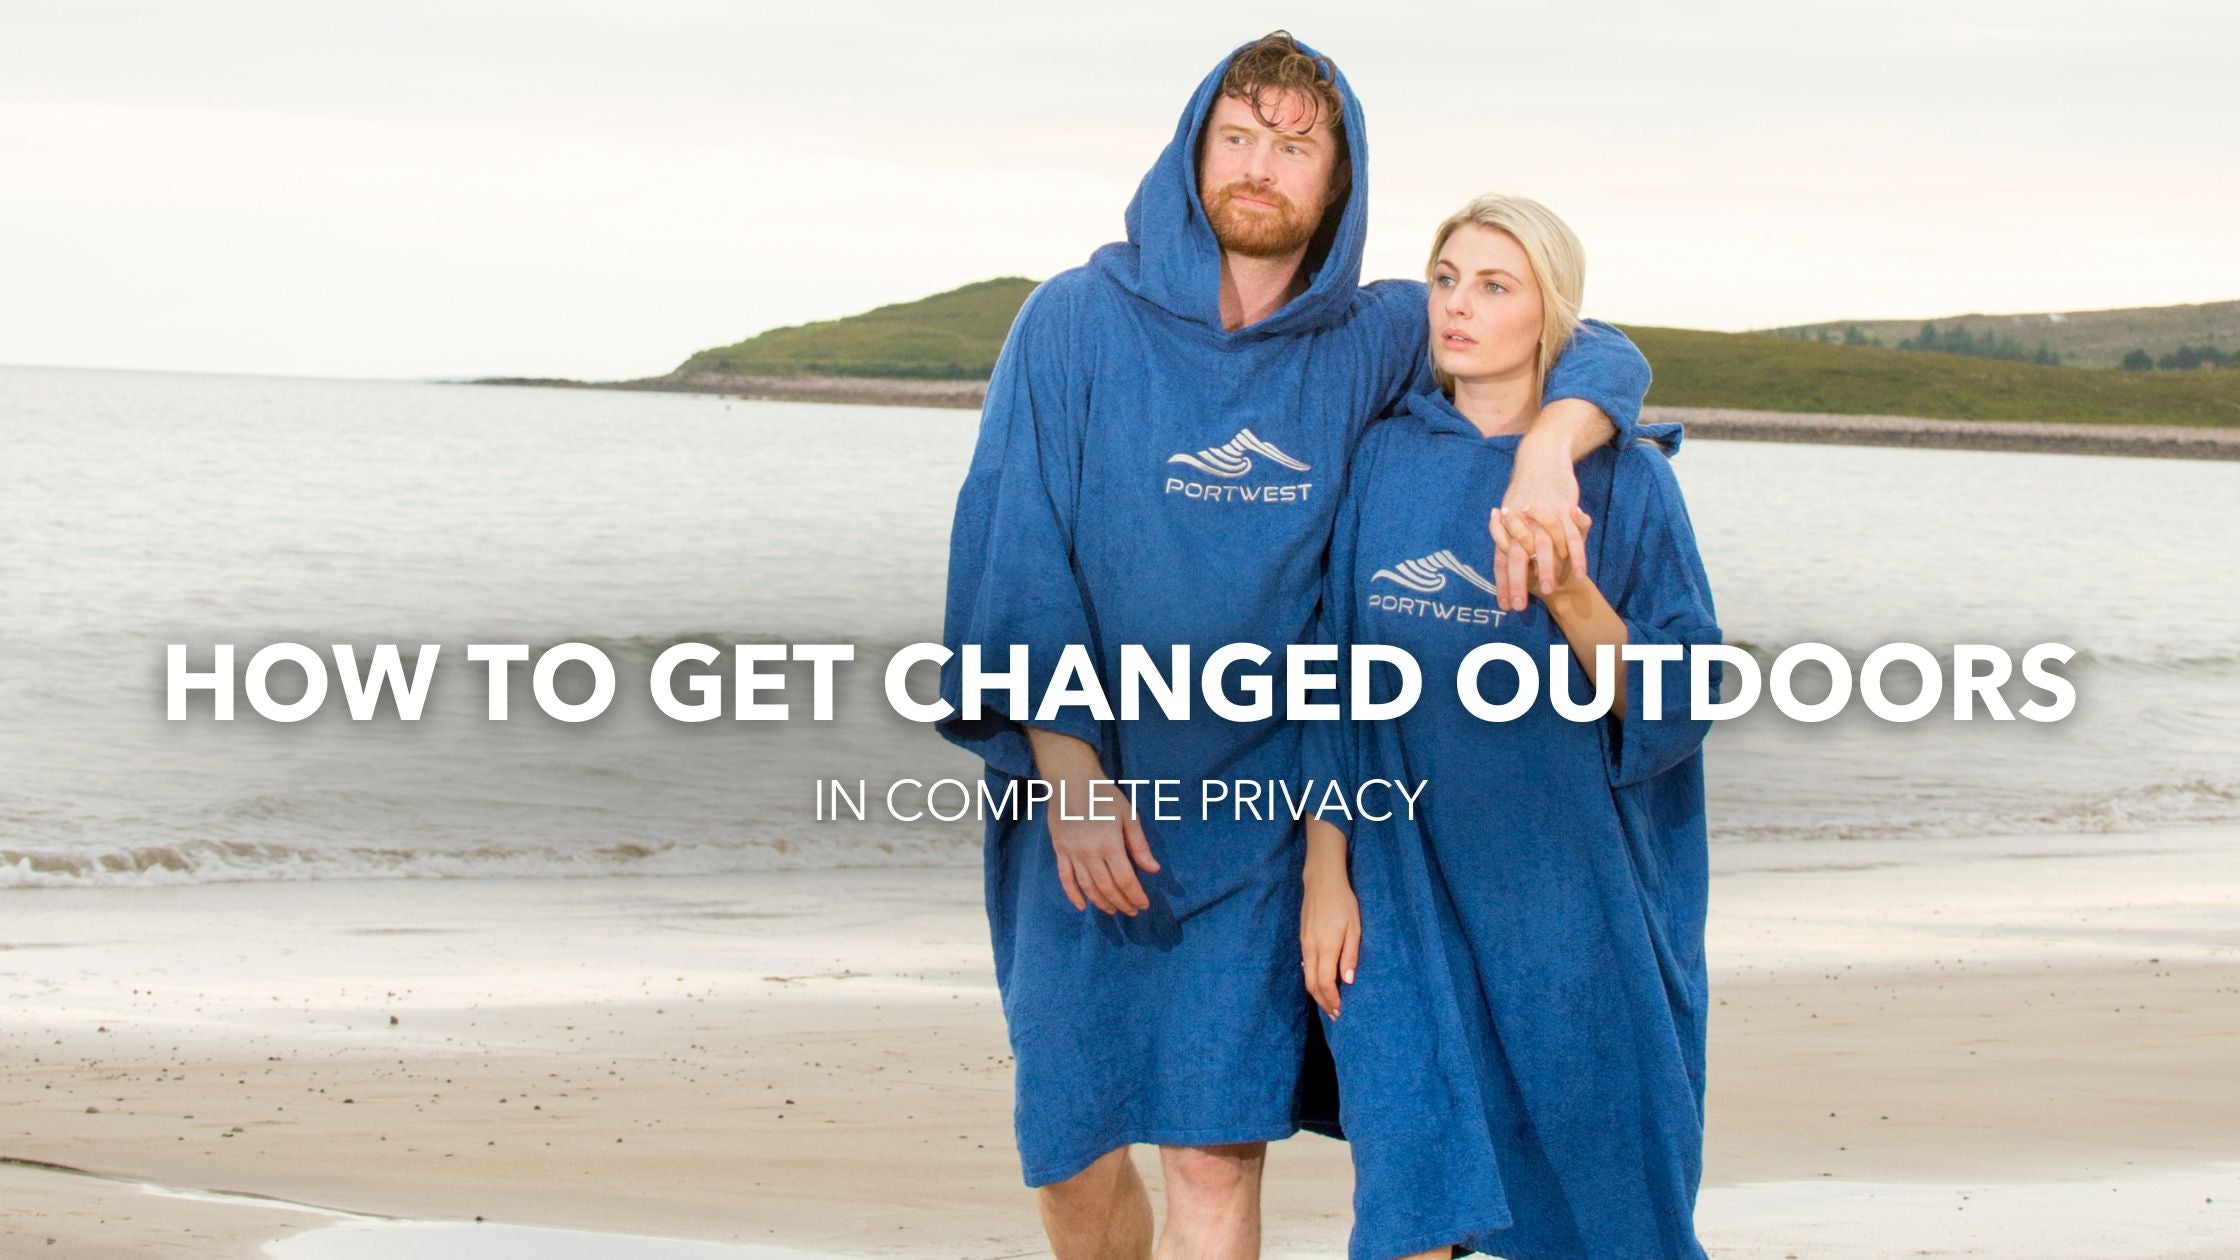 How to get changed outdoors in complete privacy. Portwest Adults changing towel available at Portwest - The Outdoor Shop